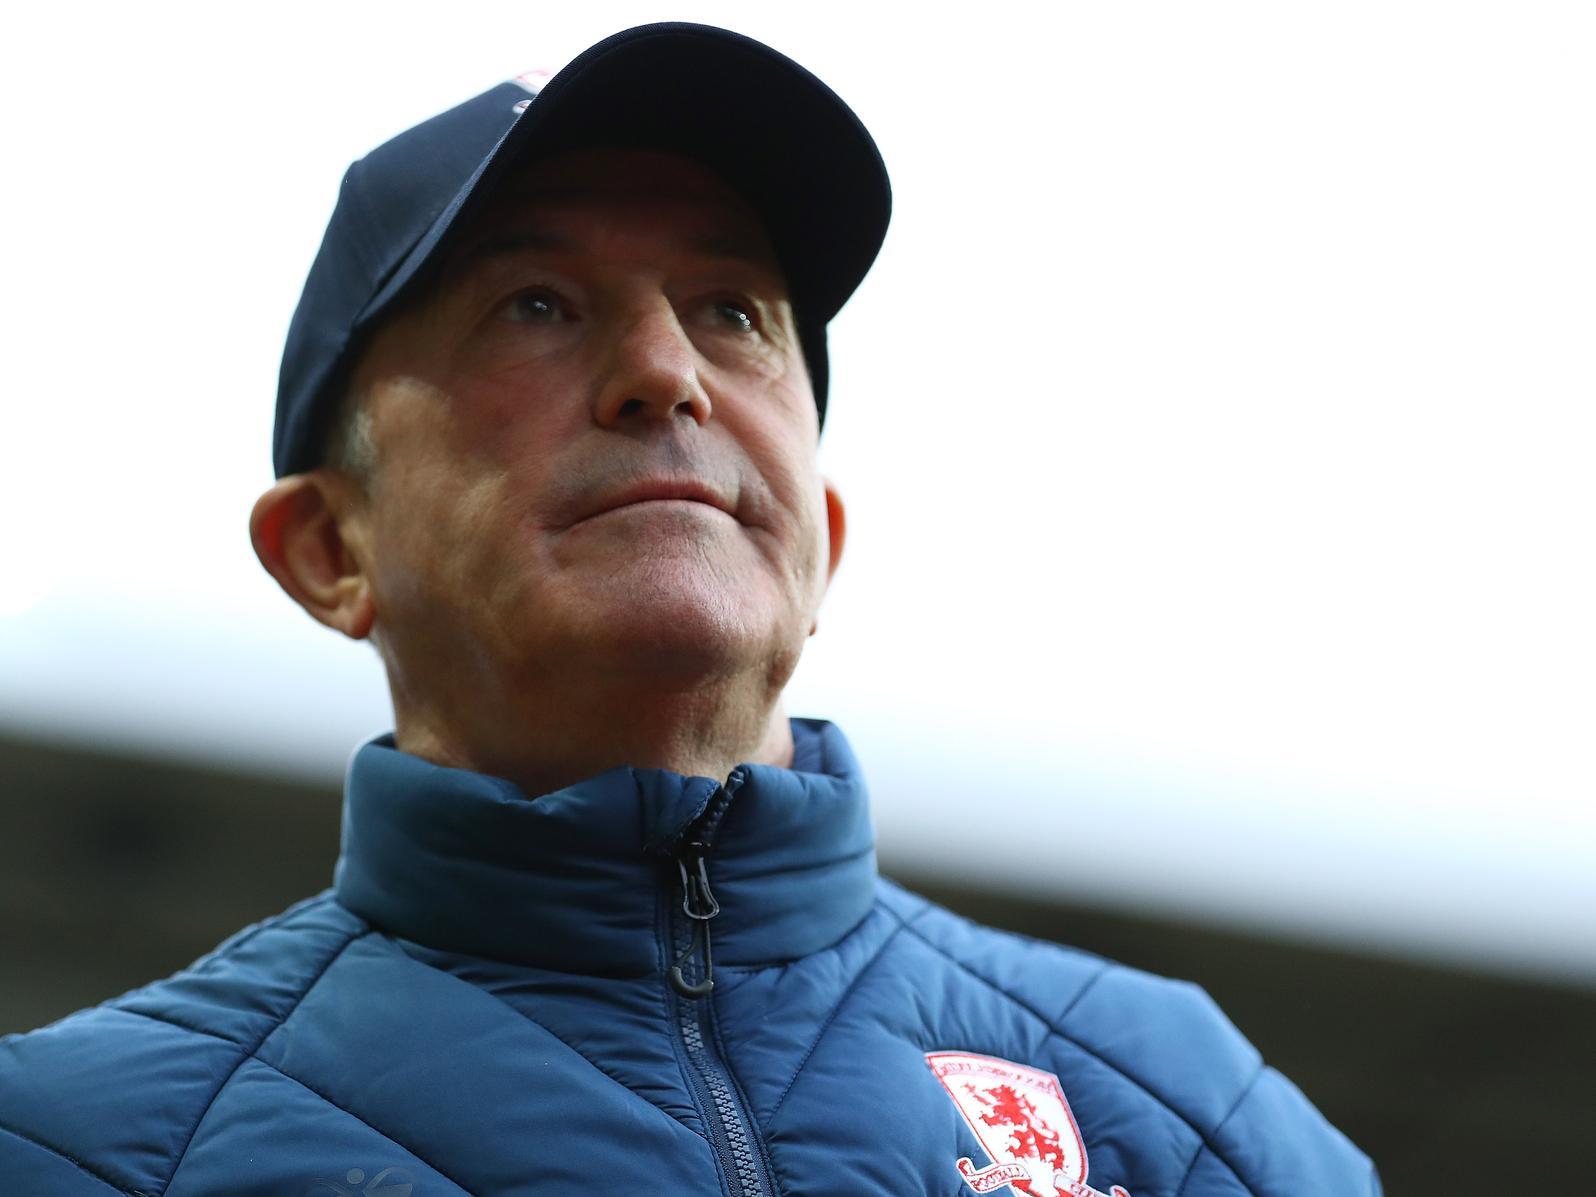 Former Middlesbrough manager Tony Pulis apparently turned down the chance to return to management with Cardiff City, before the Welsh side appointed Neil Harris instead. (HITC)